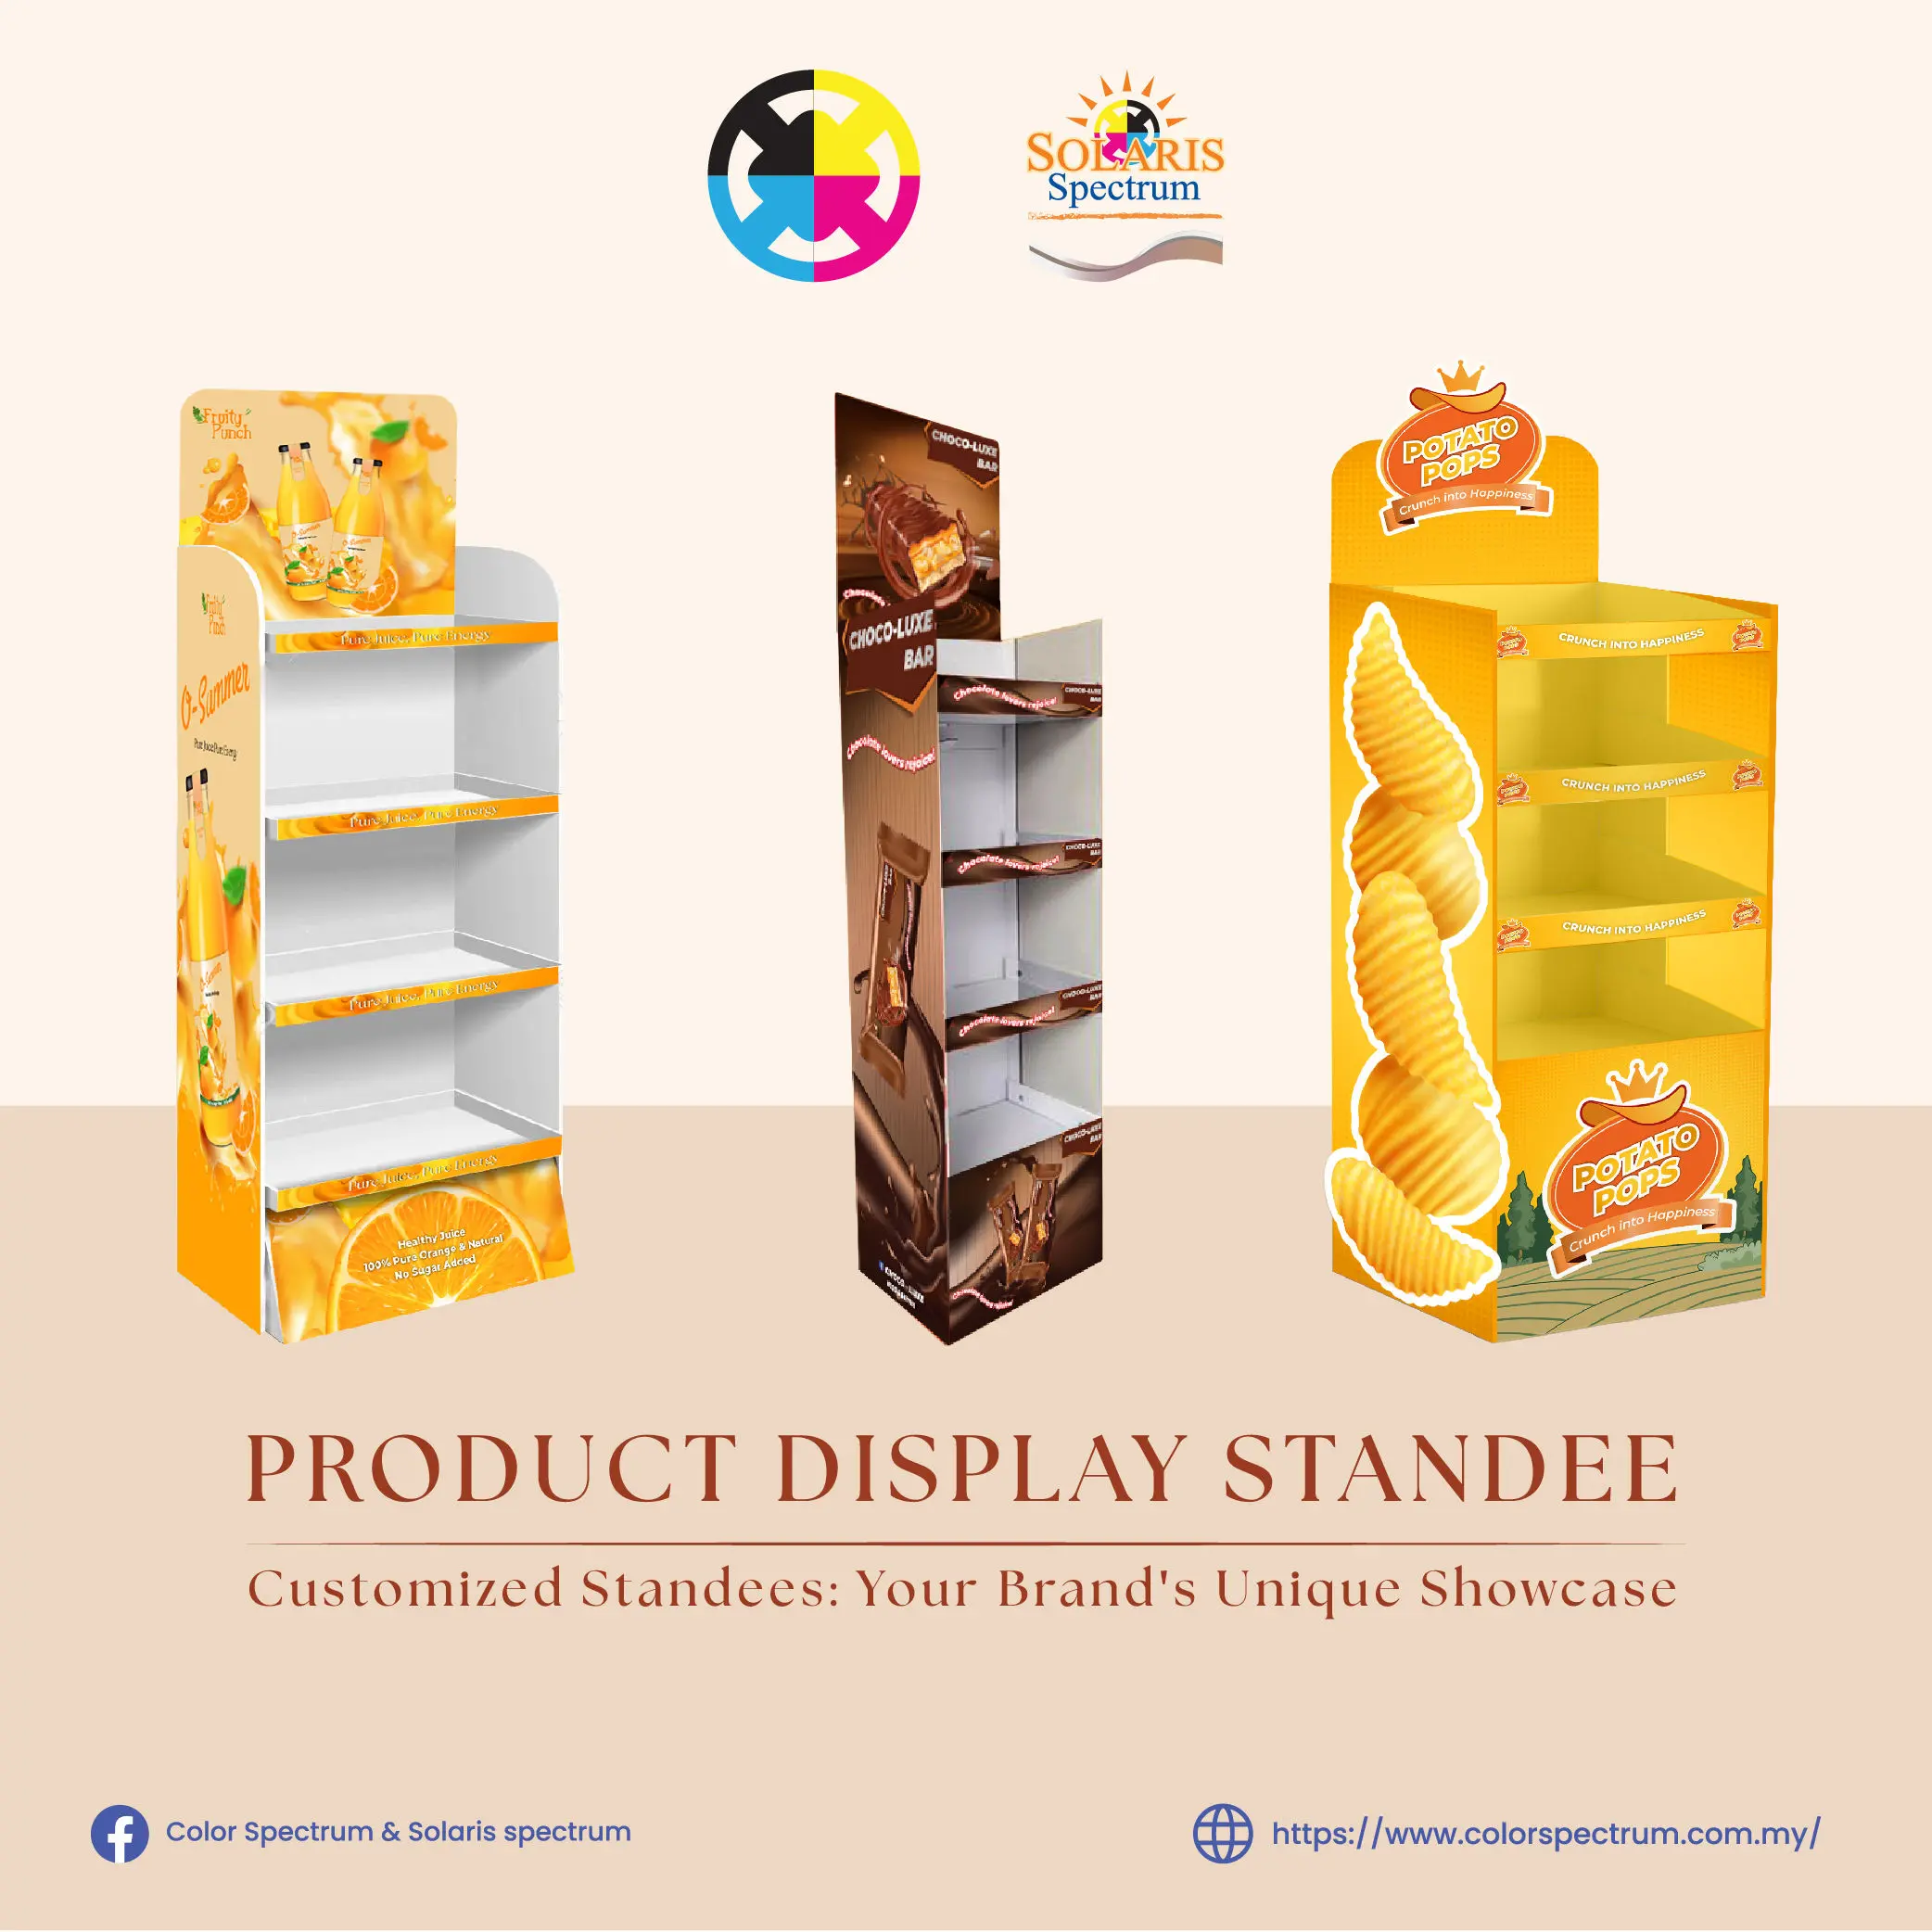 7) Product Display Standee